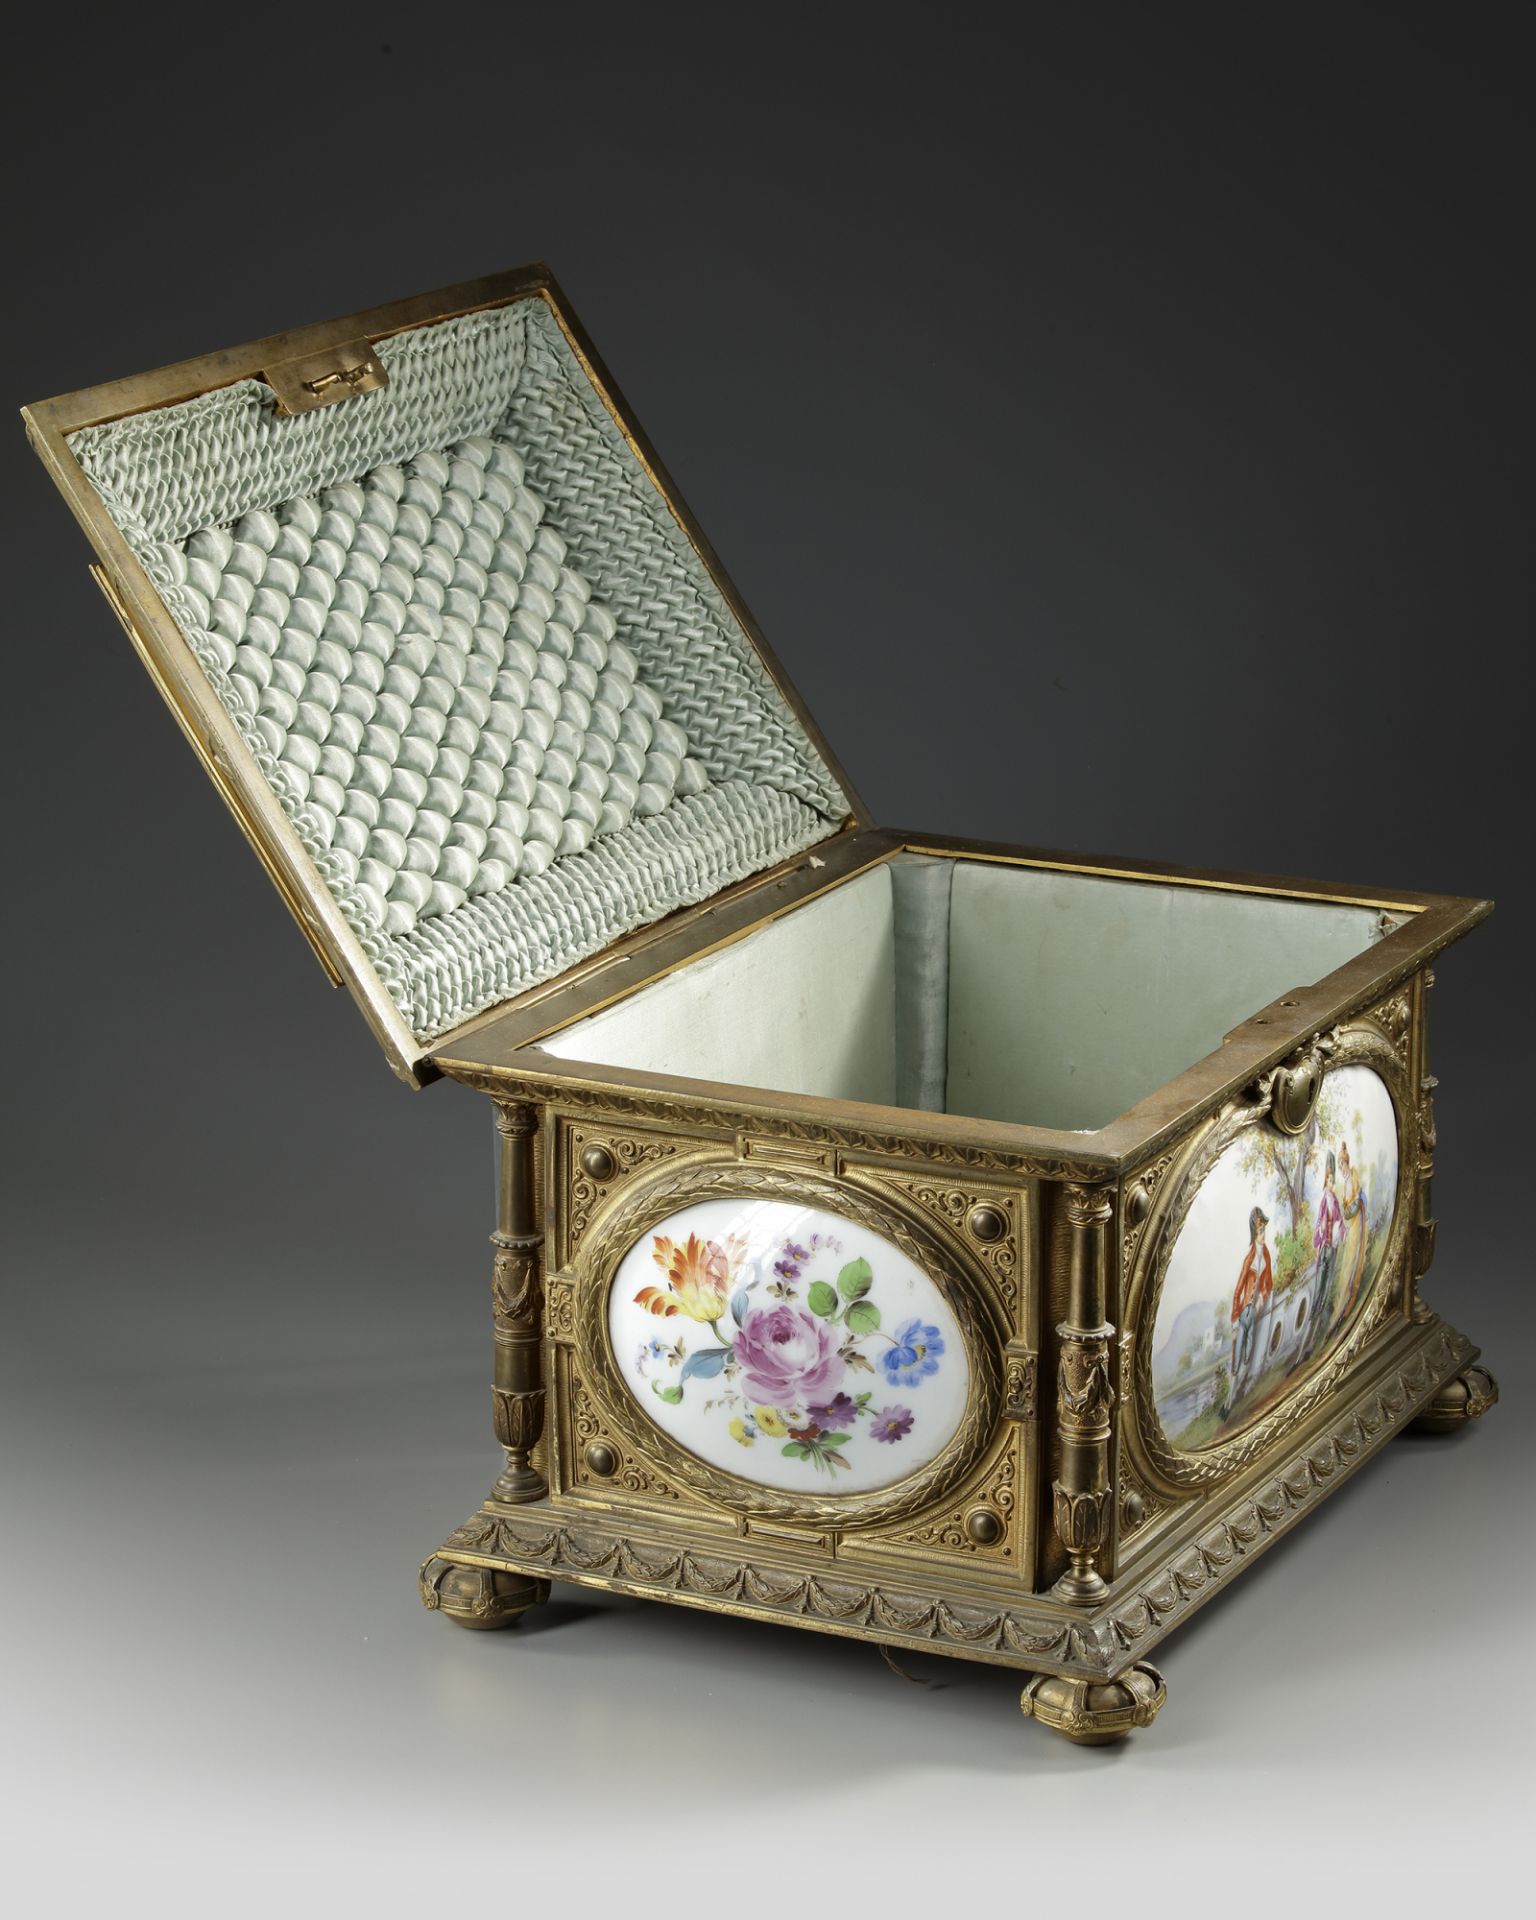 A LARGE JEWELRY BOX, SEVRES PORCELAIN, 19TH CENTURY - Image 5 of 5